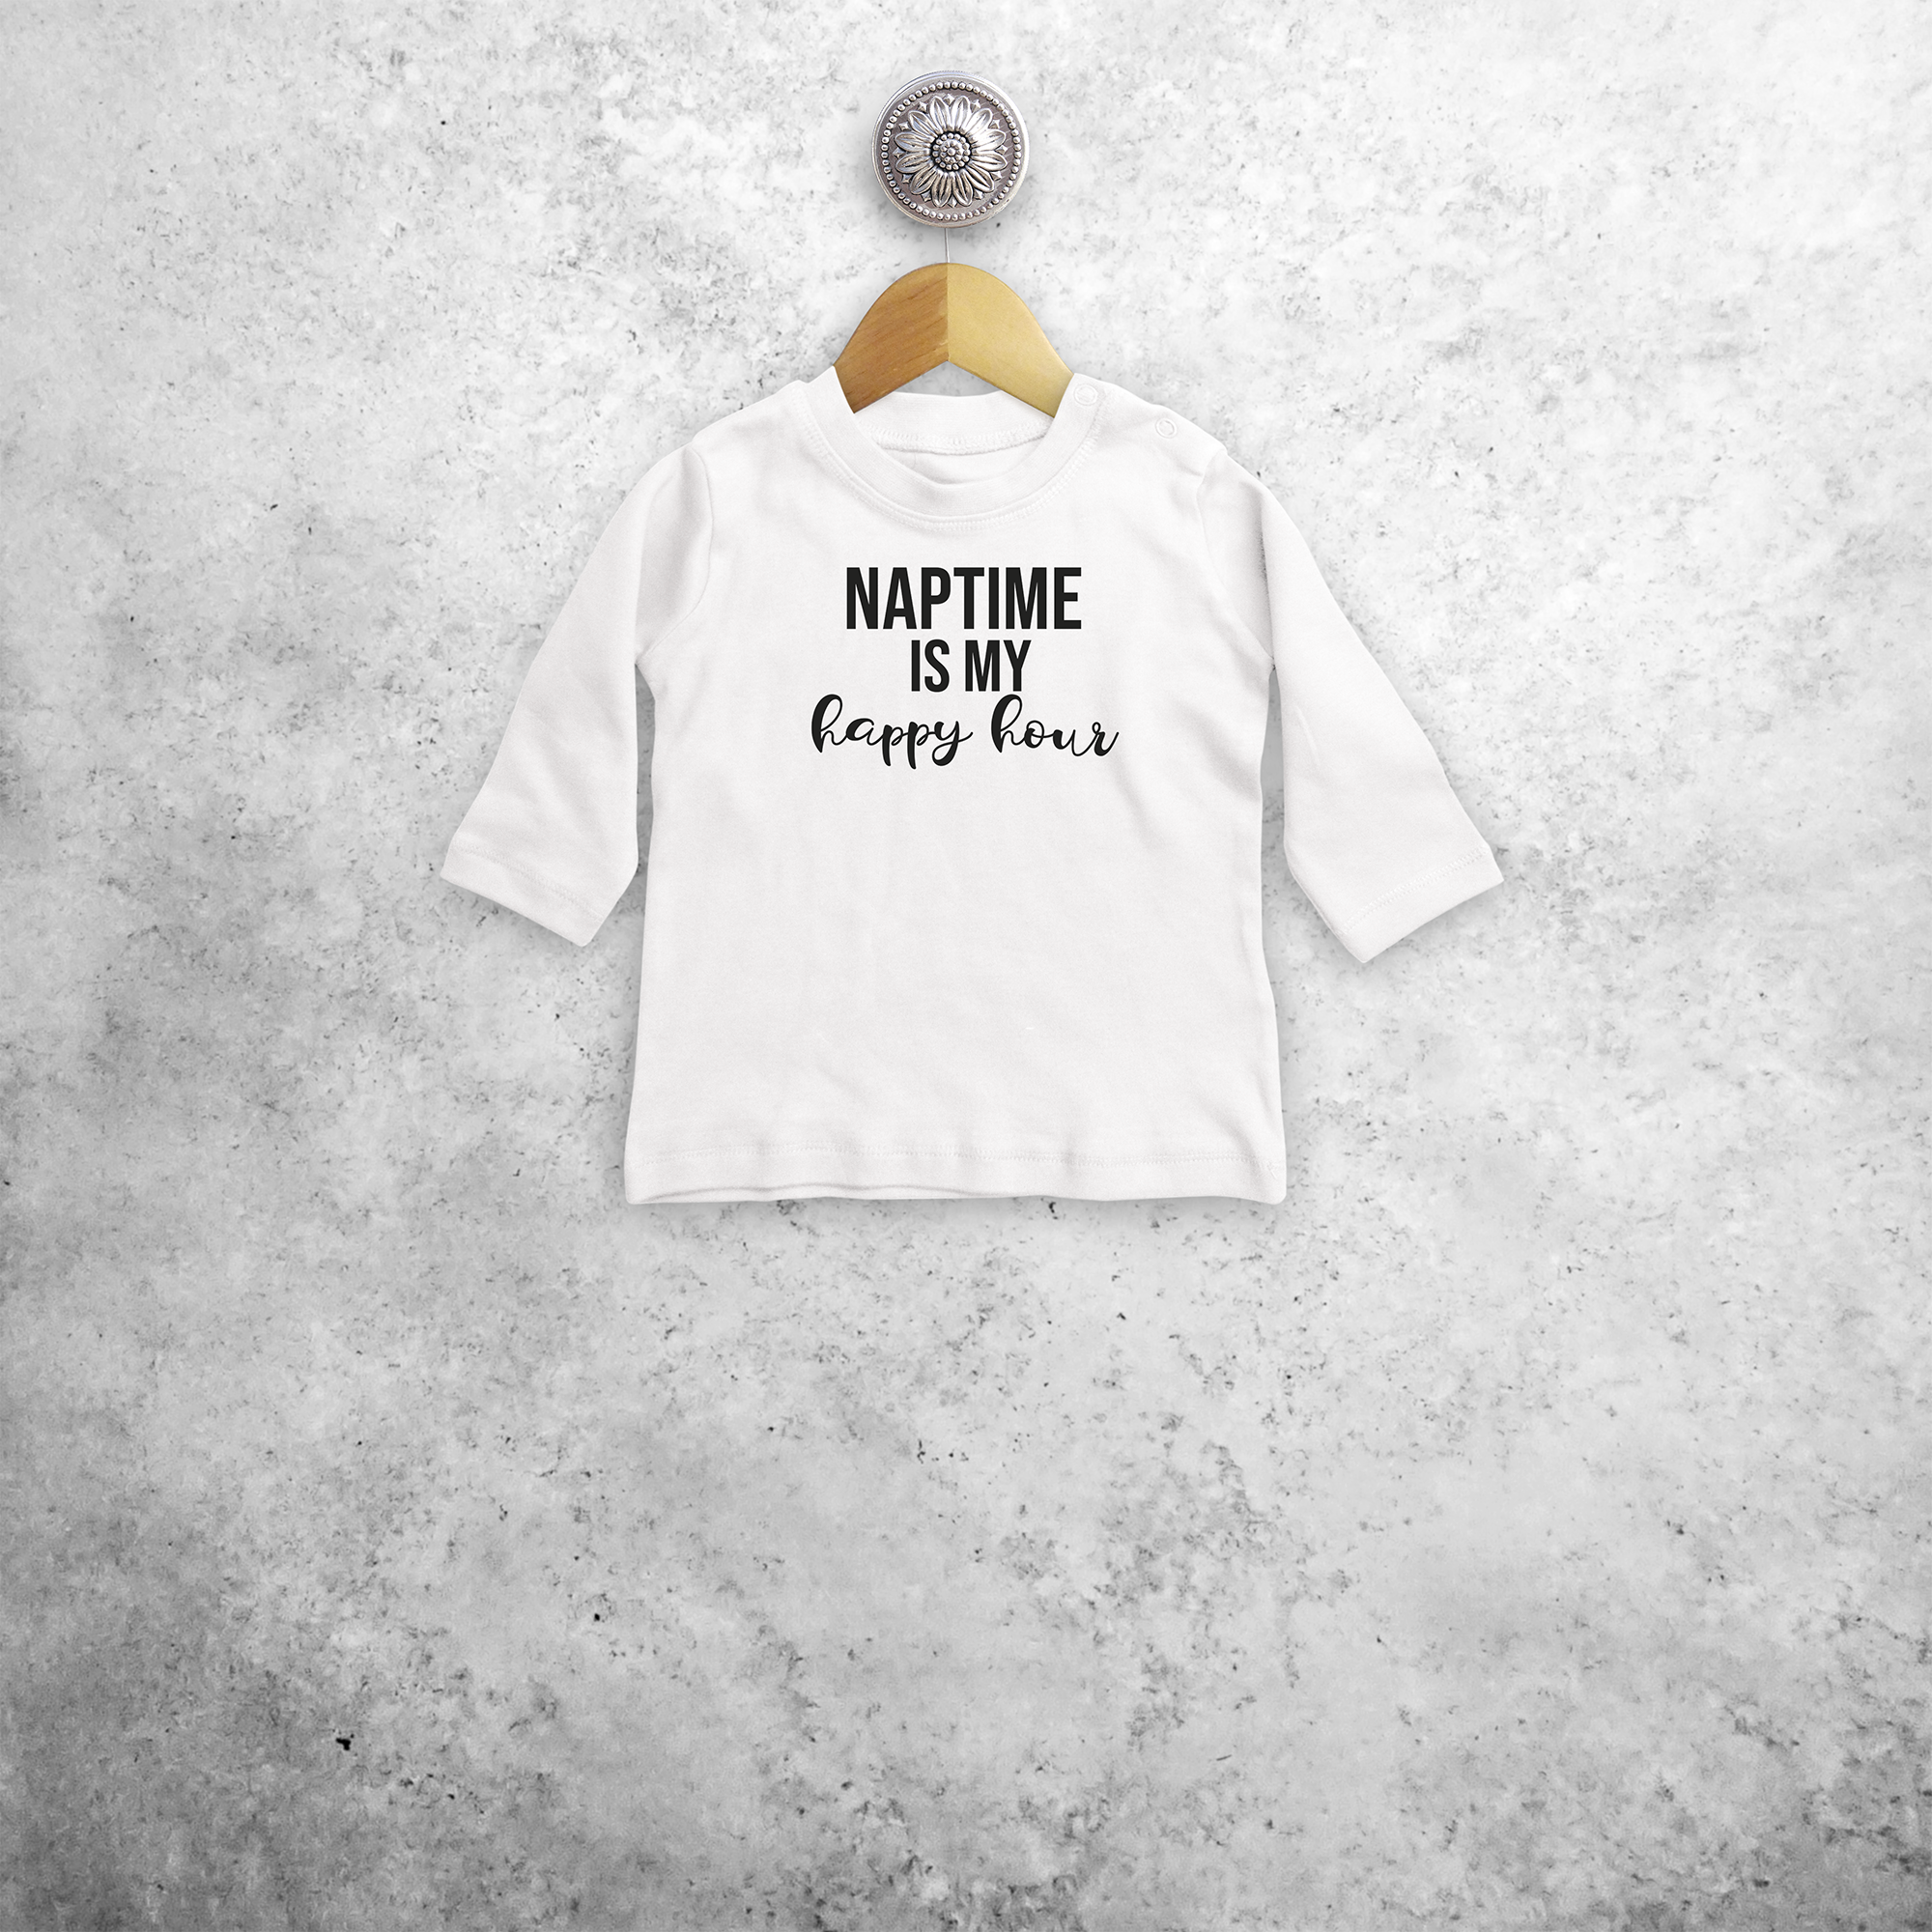 'Naptime is my happy hour' baby longsleeve shirt